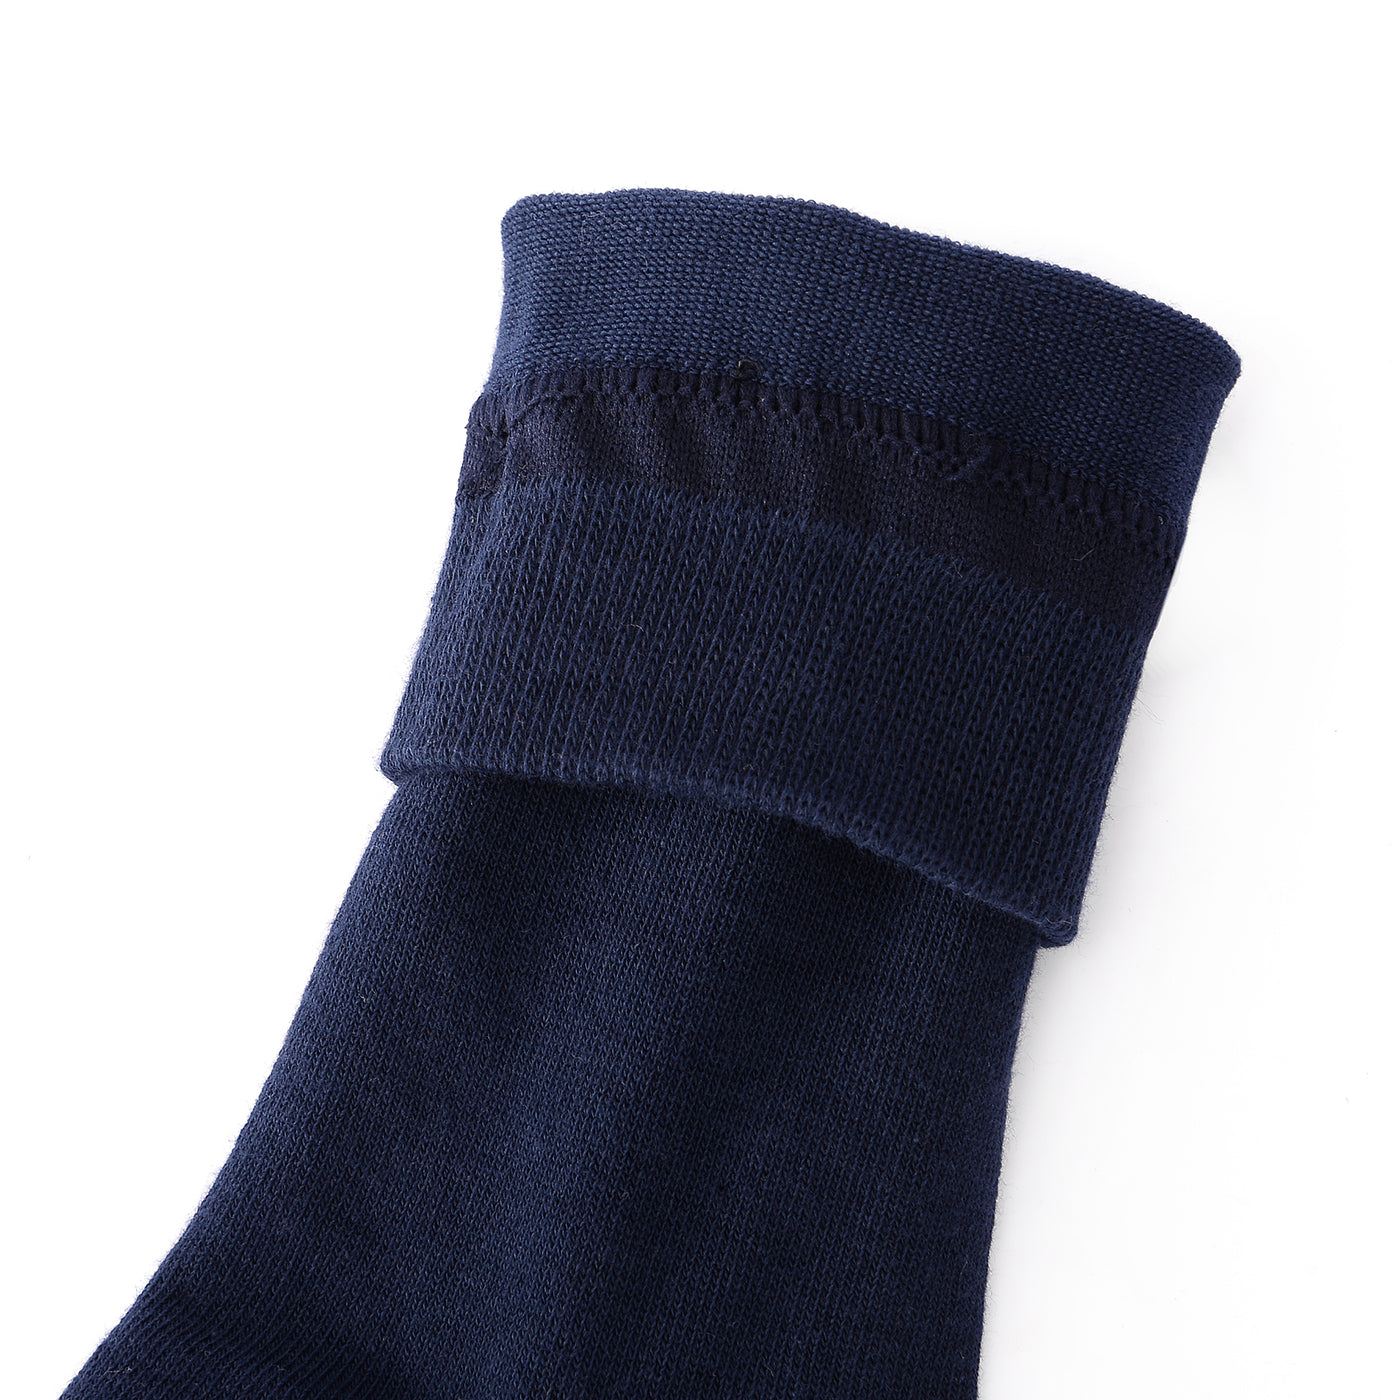 Laulax 4 Pairs High Quality Finest Combed Cotton Dress Socks, Navy, Gift Set